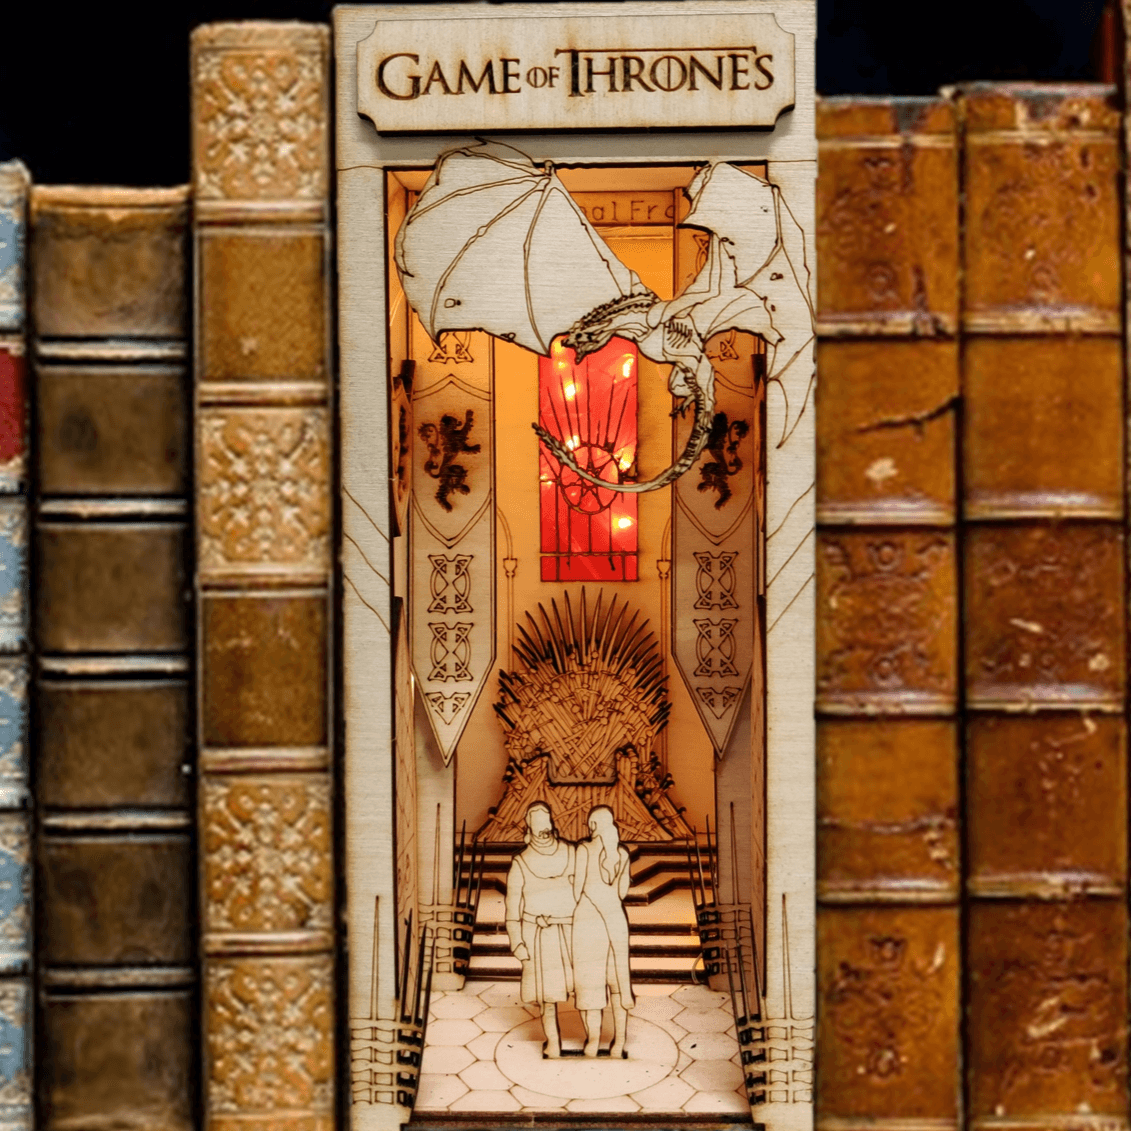 Game Of Thrones Book Nook DIY Book Nook Kits House Of Dragon Book Shelf Inserts